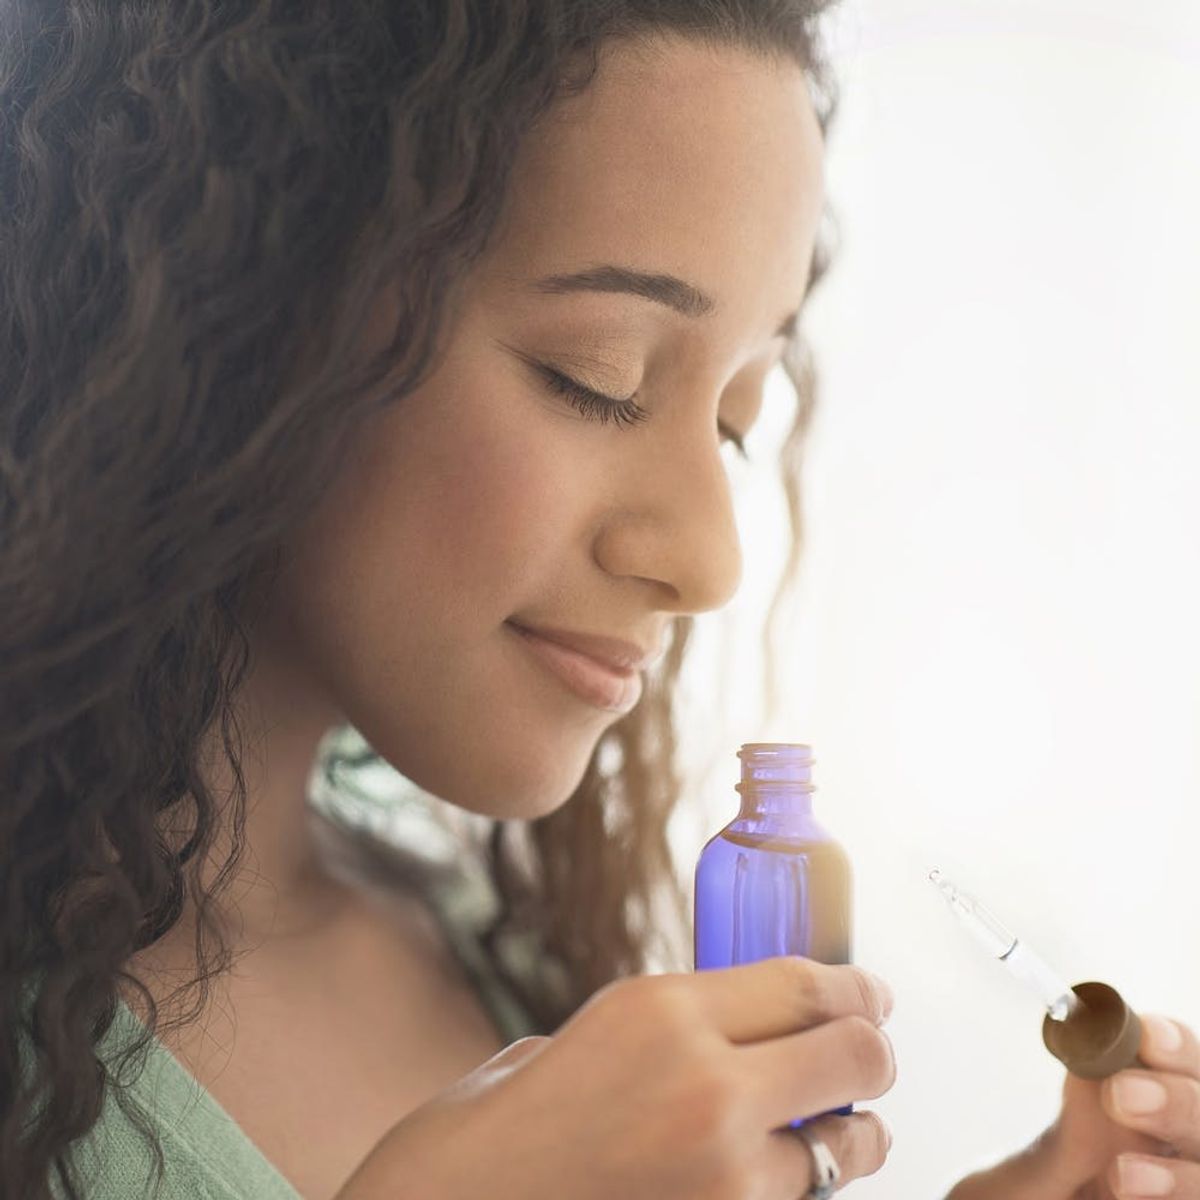 6 Ways to Use Essential Oils to Help Improve Your Mood